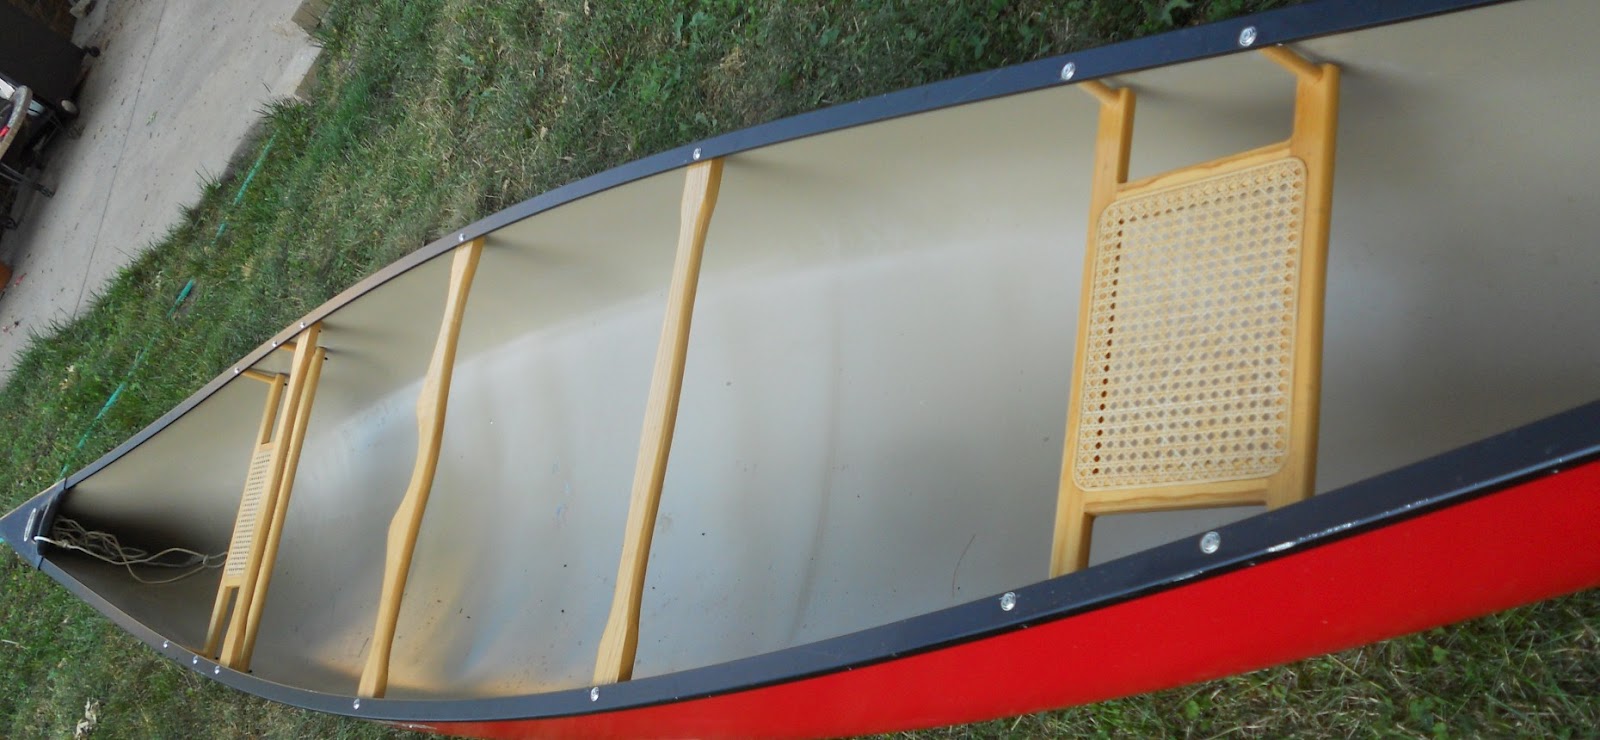 The DirtBlog: Old Town Penobscot 17 Canoe For Sale SOLD!